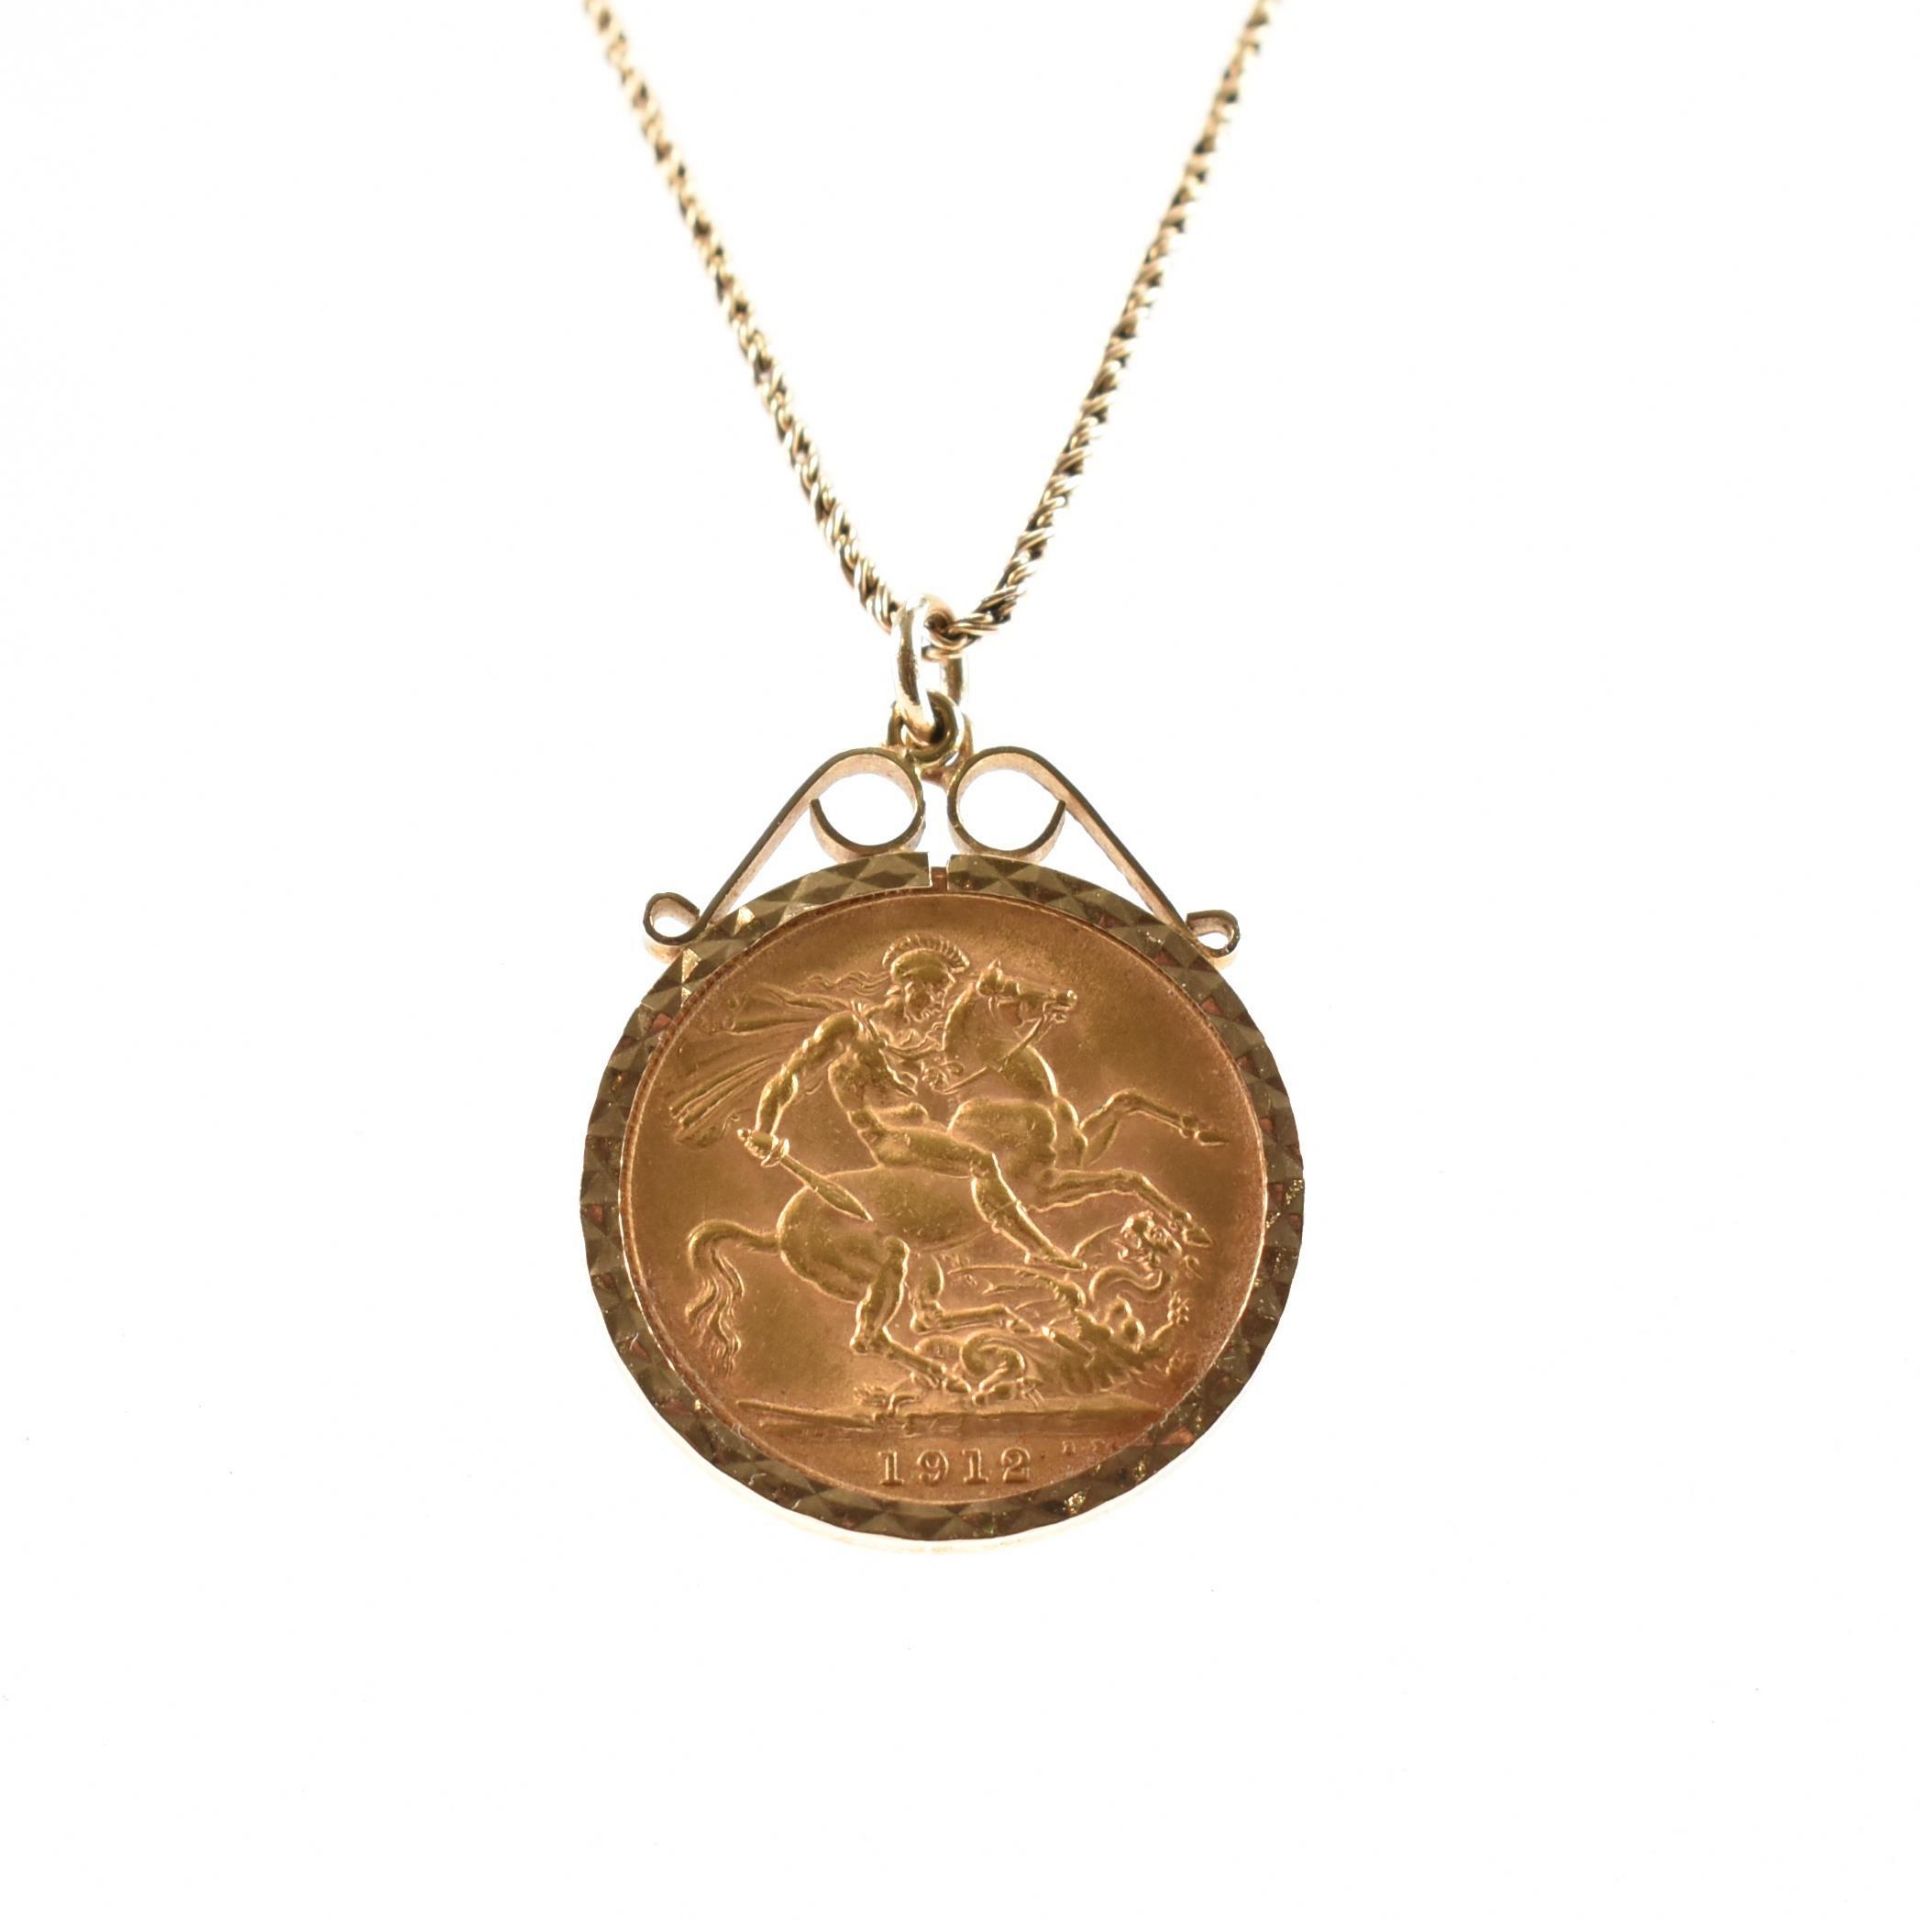 MOUNTED 1912 FULL SOVEREIGN COIN HALLMARKED 9CT GOLD MOUNT & CHAIN - Image 2 of 5